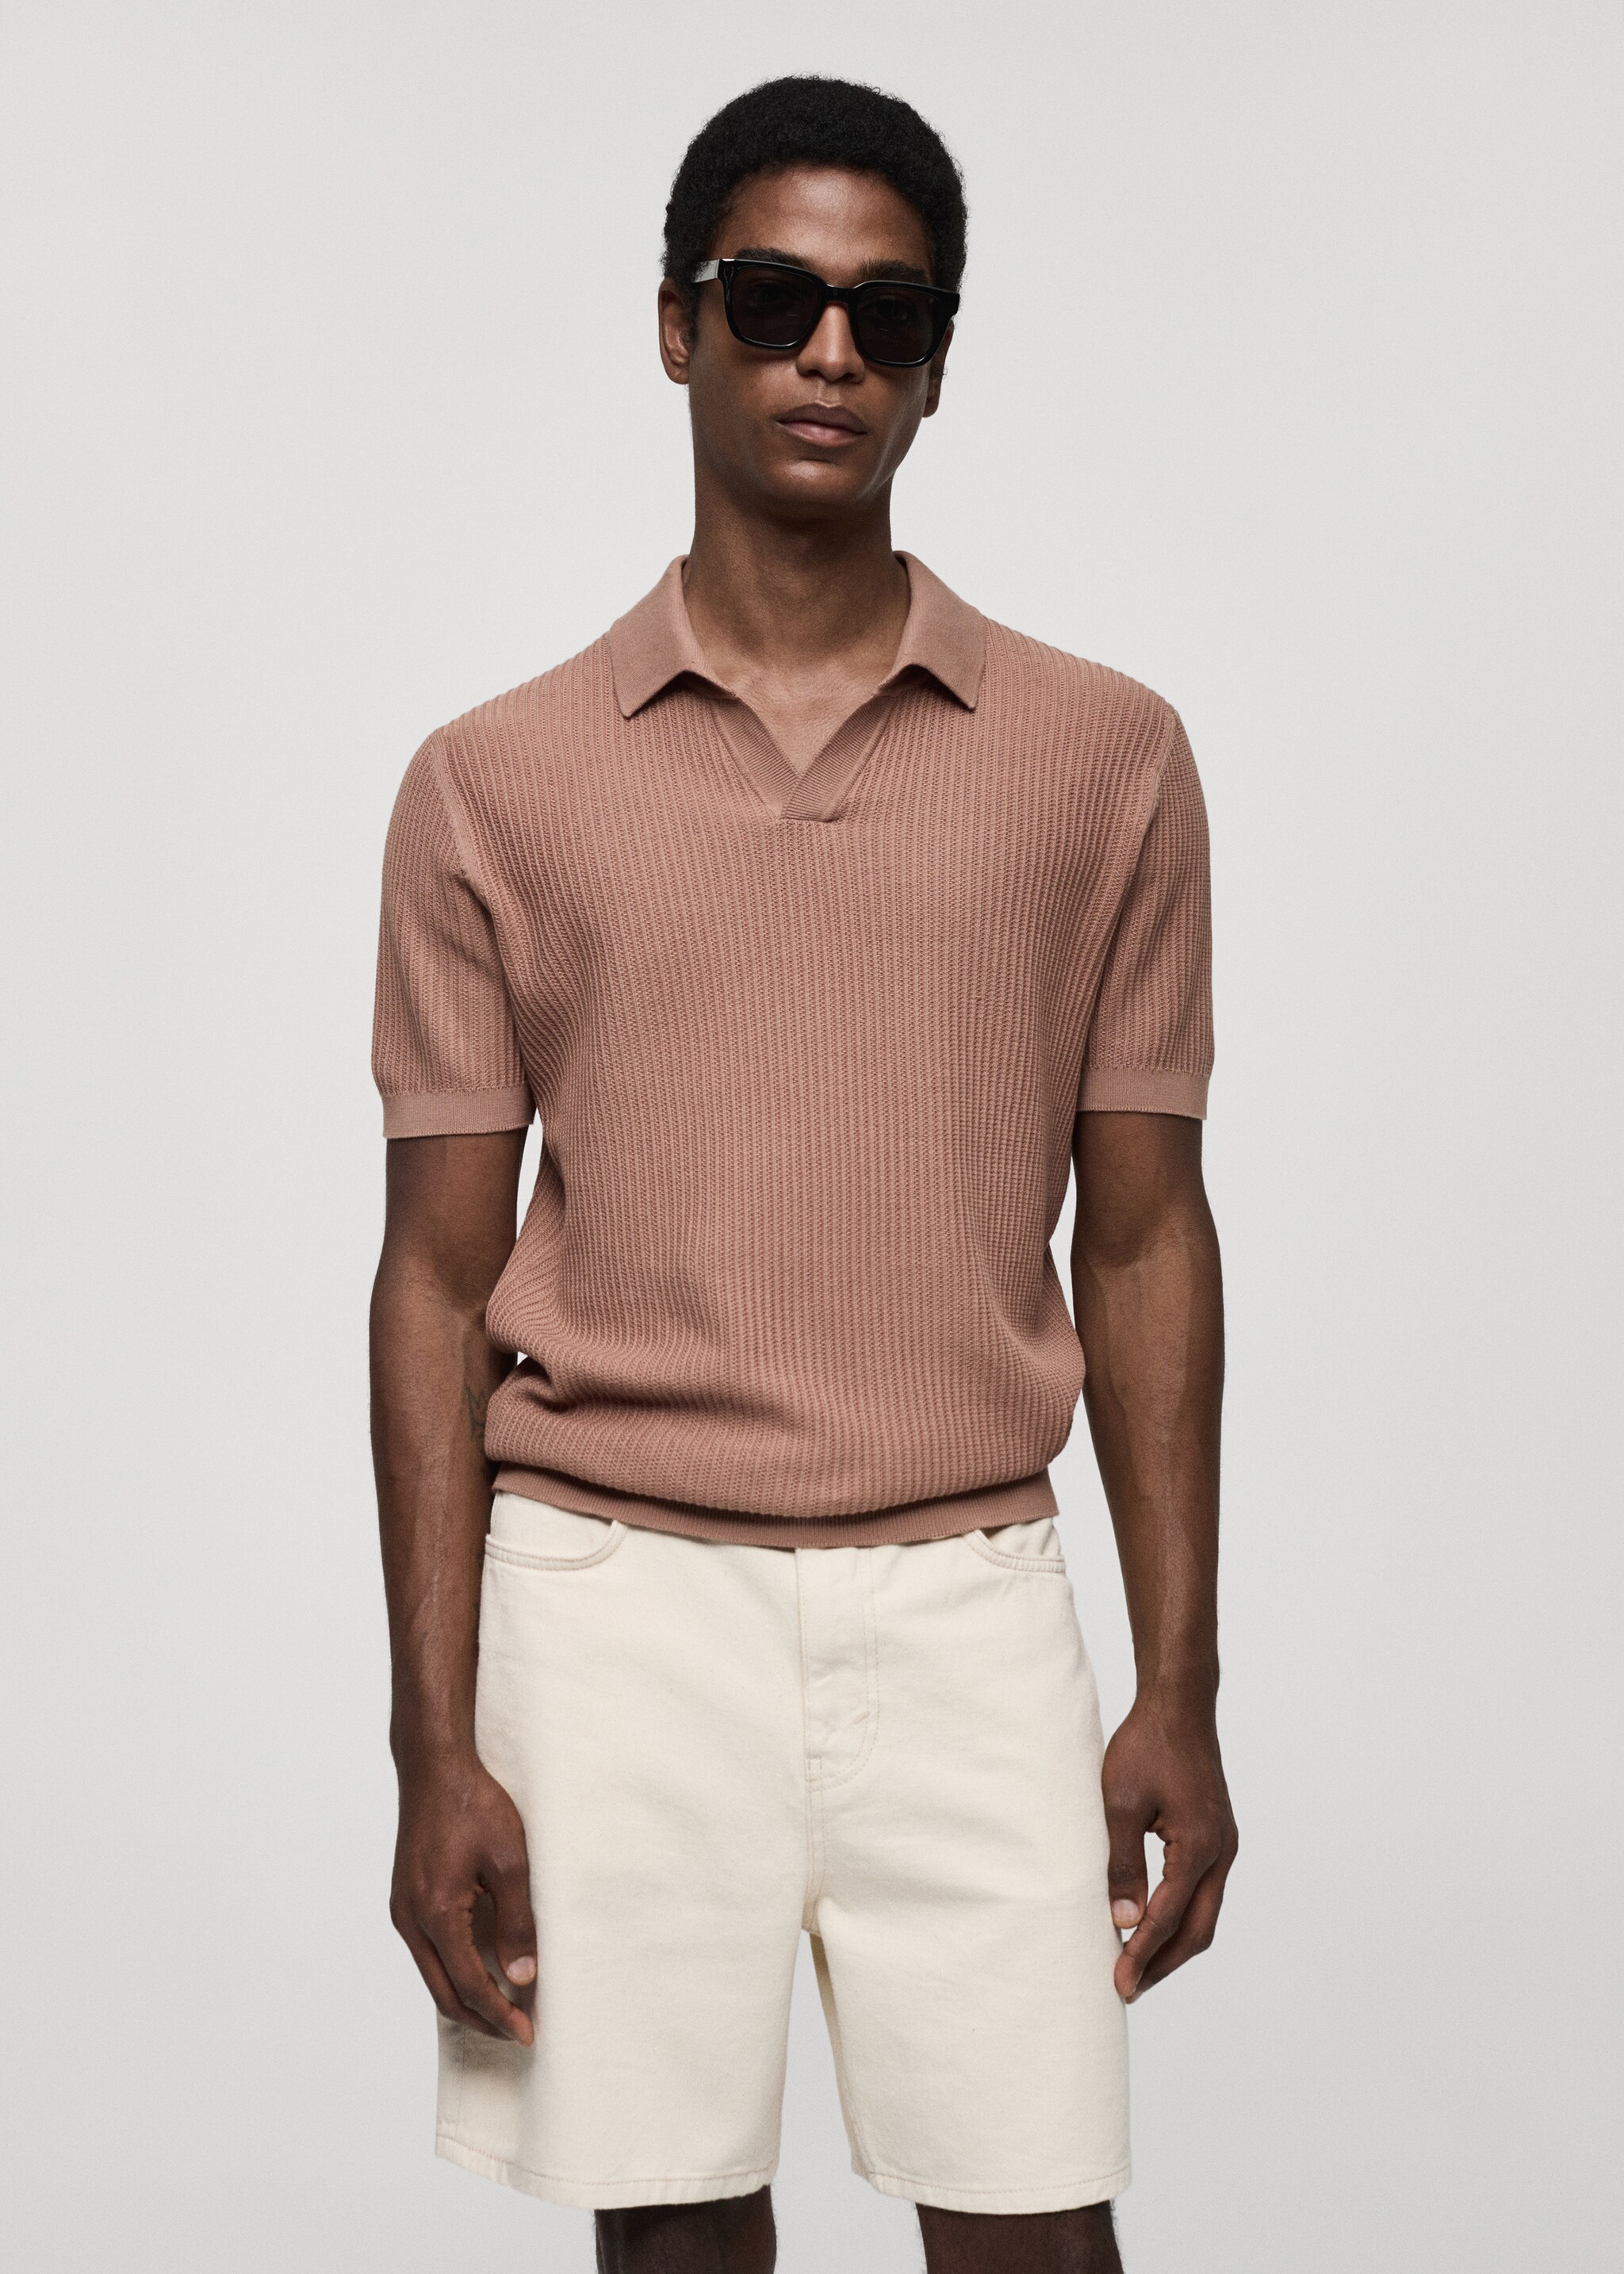 Ribbed cotton knitted polo shirt - Medium plane